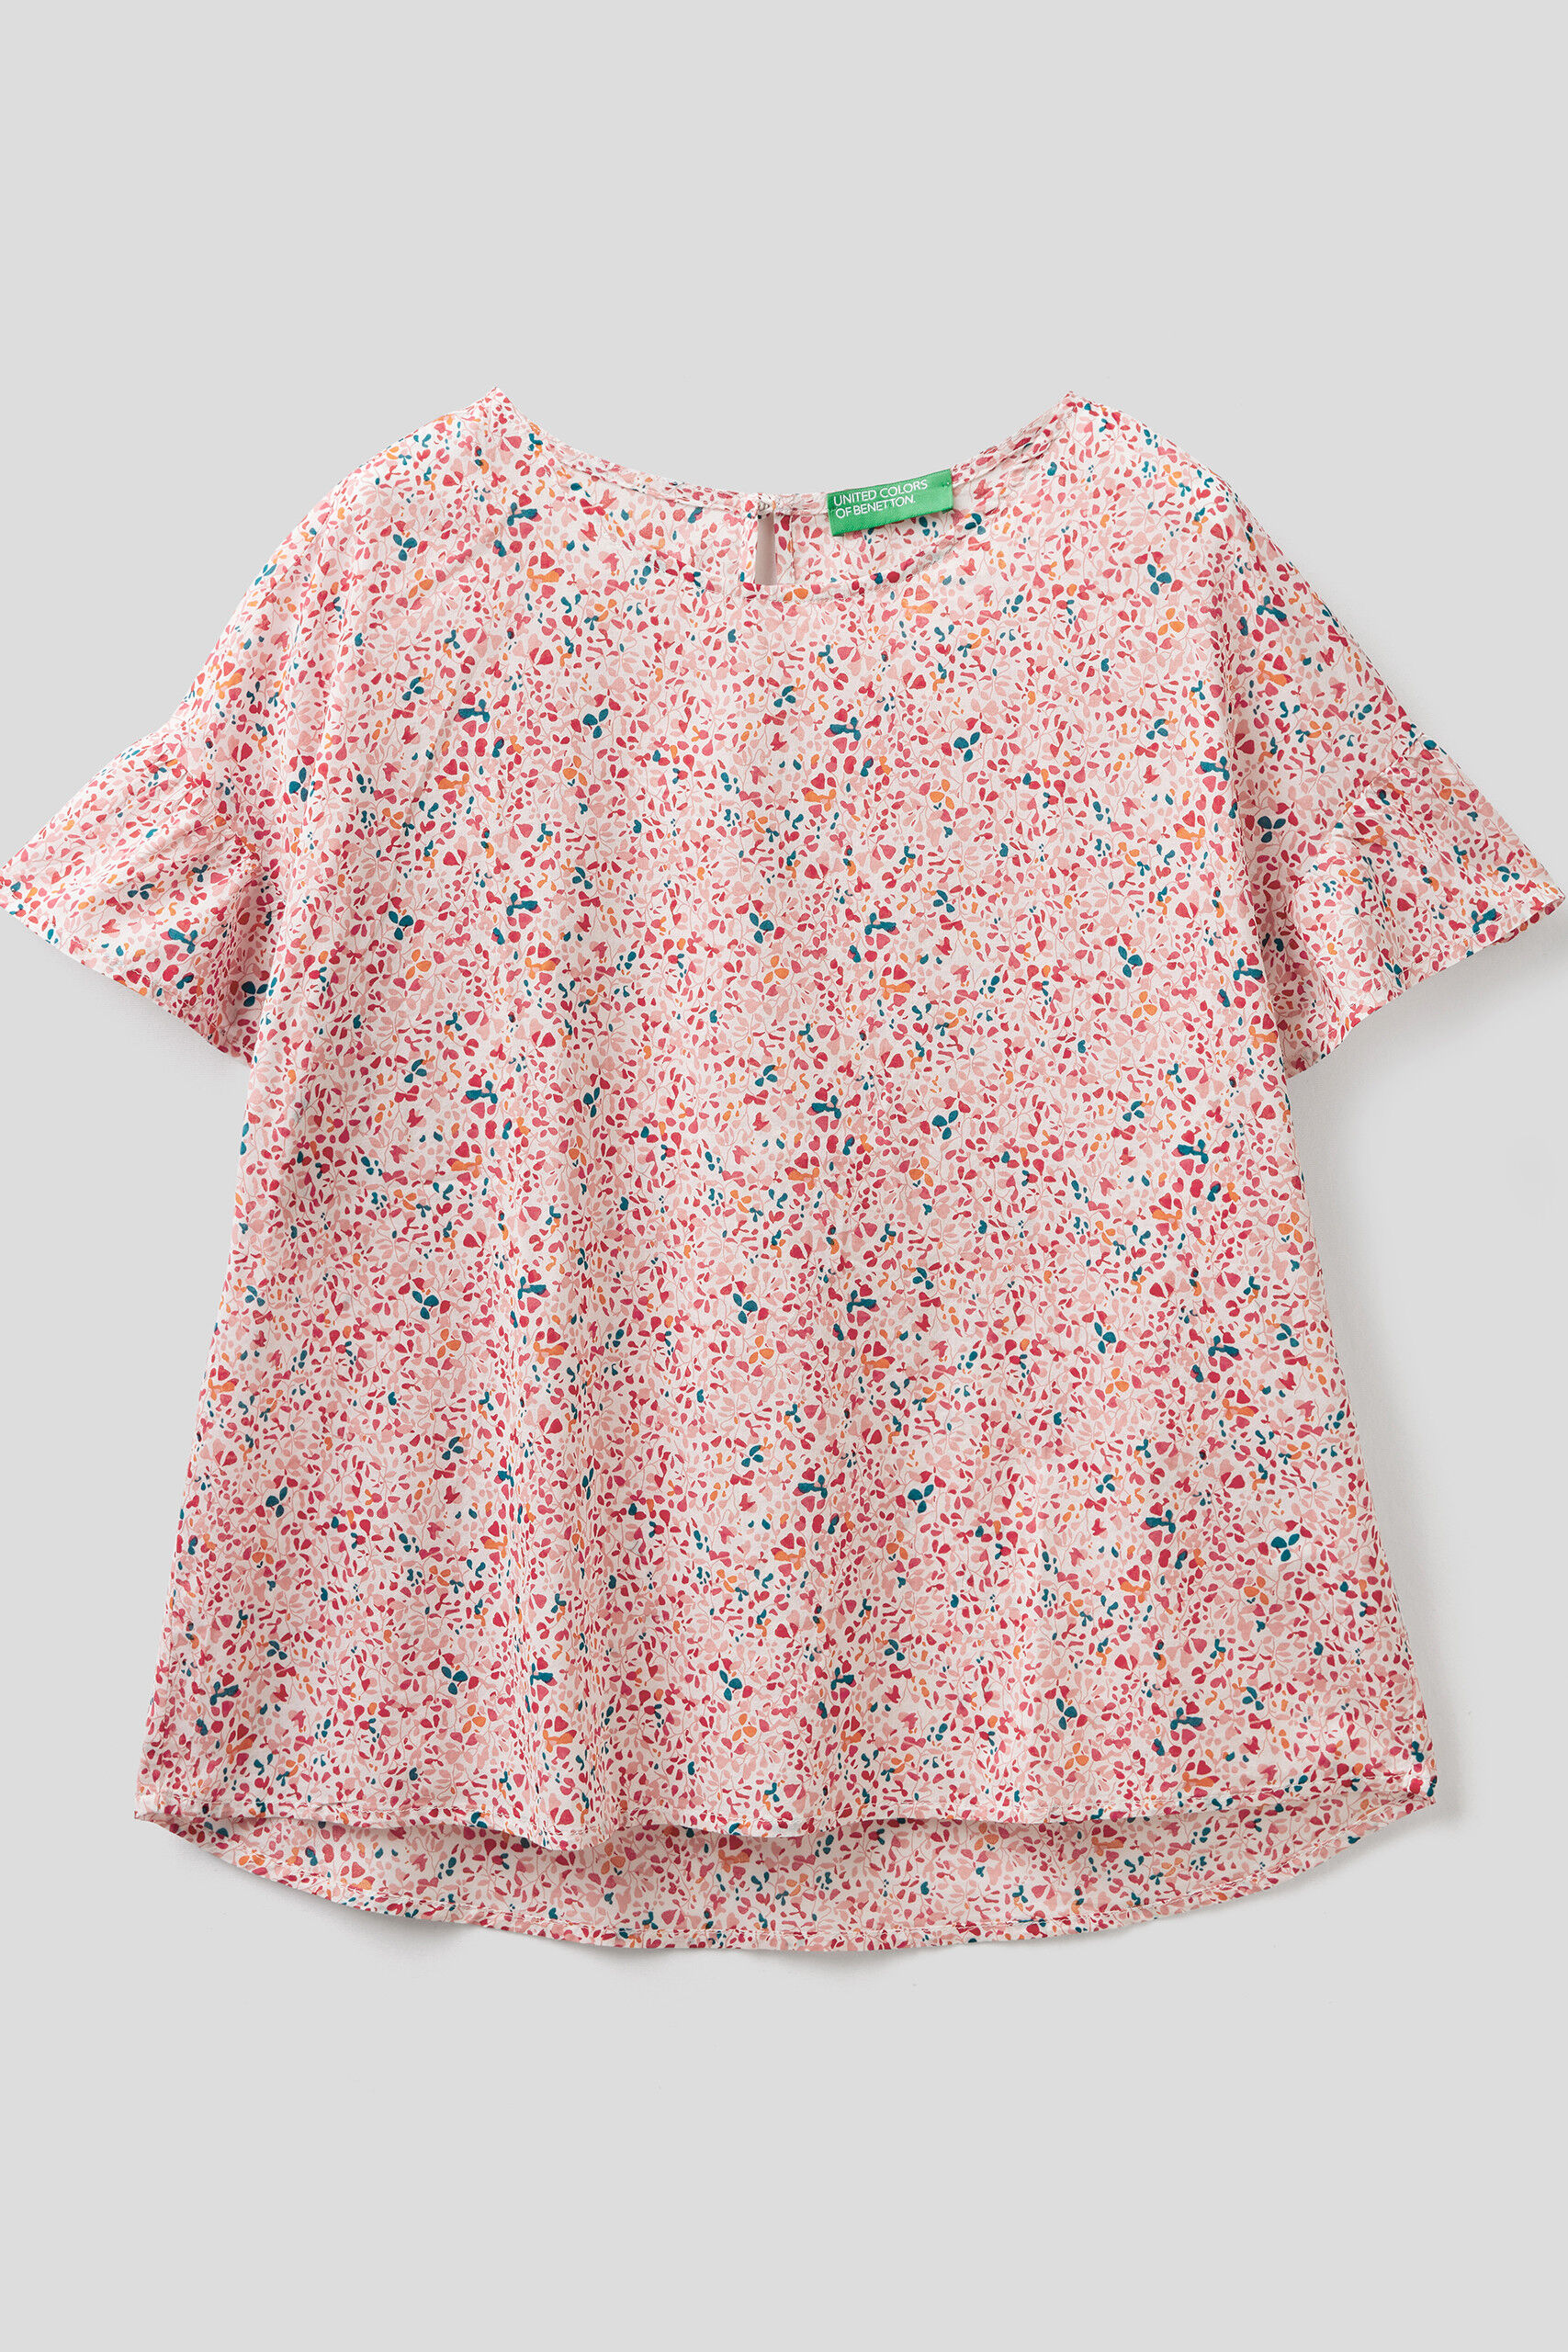 New Collection Women's Apparel | Benetton